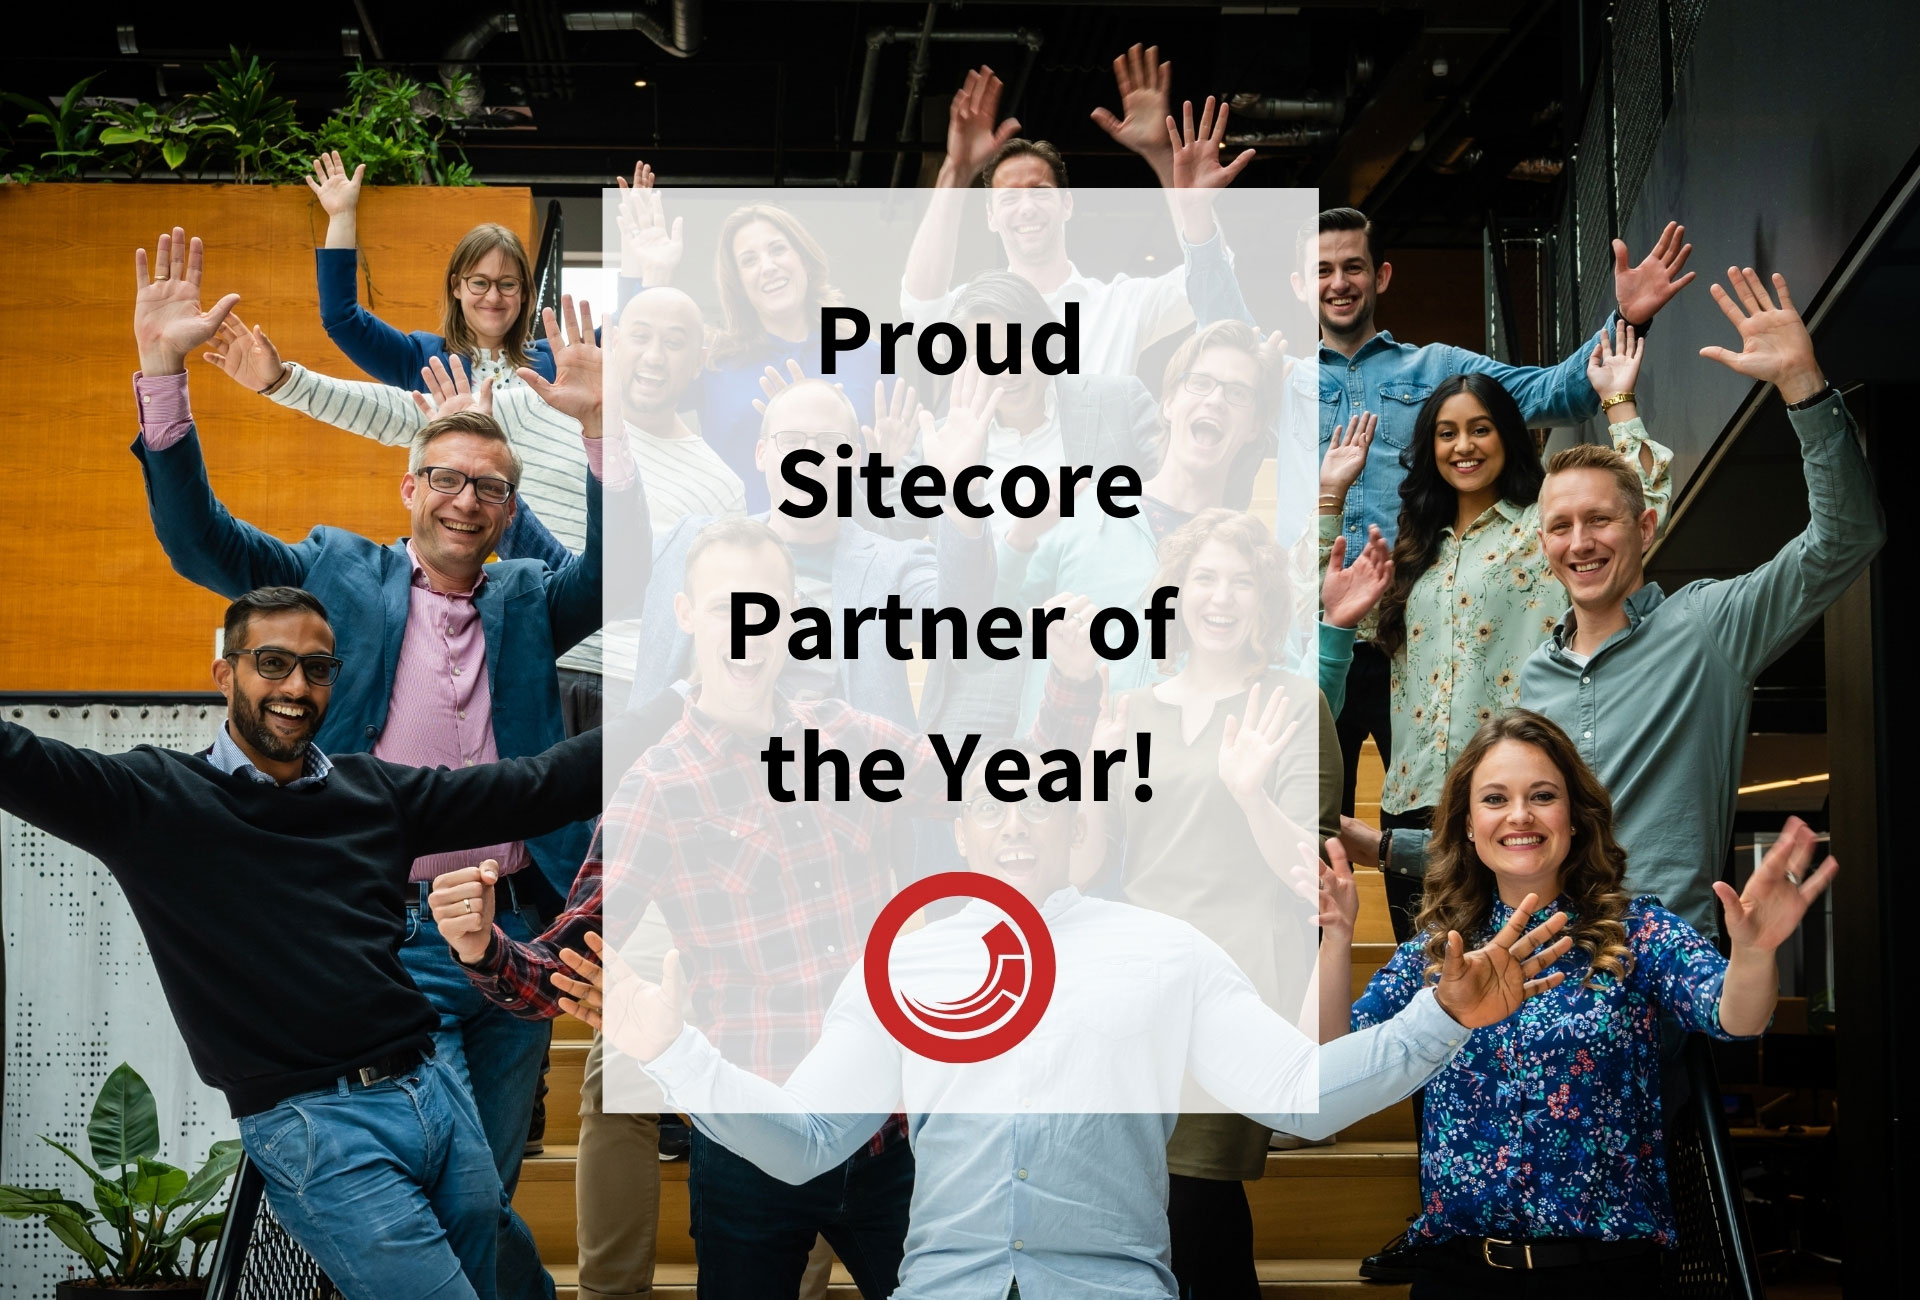 Sitecore Partner of the Year